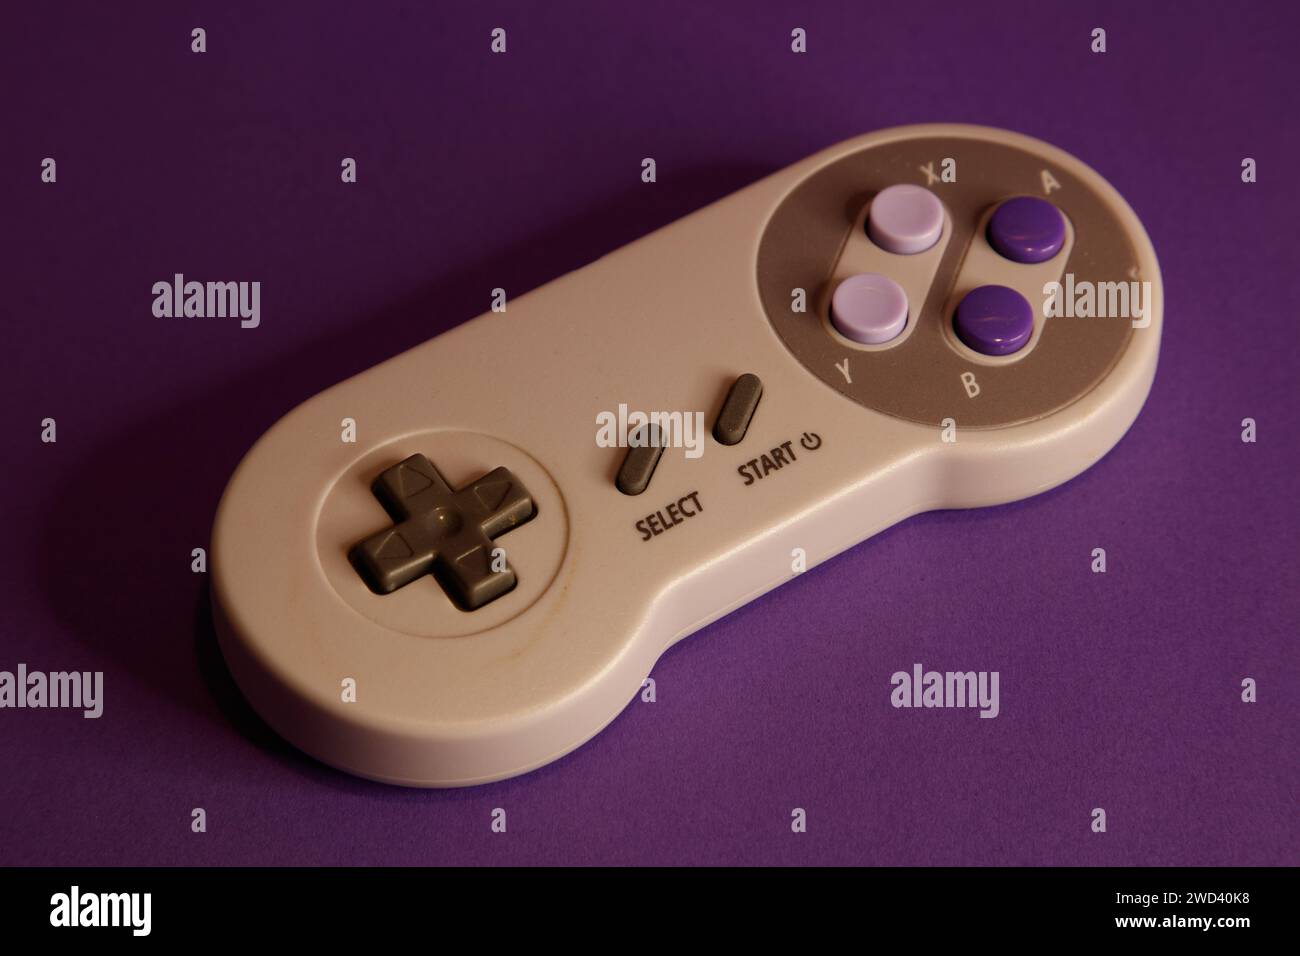 Nintendo type video game contollers on a mouve background, studio photography Stock Photo